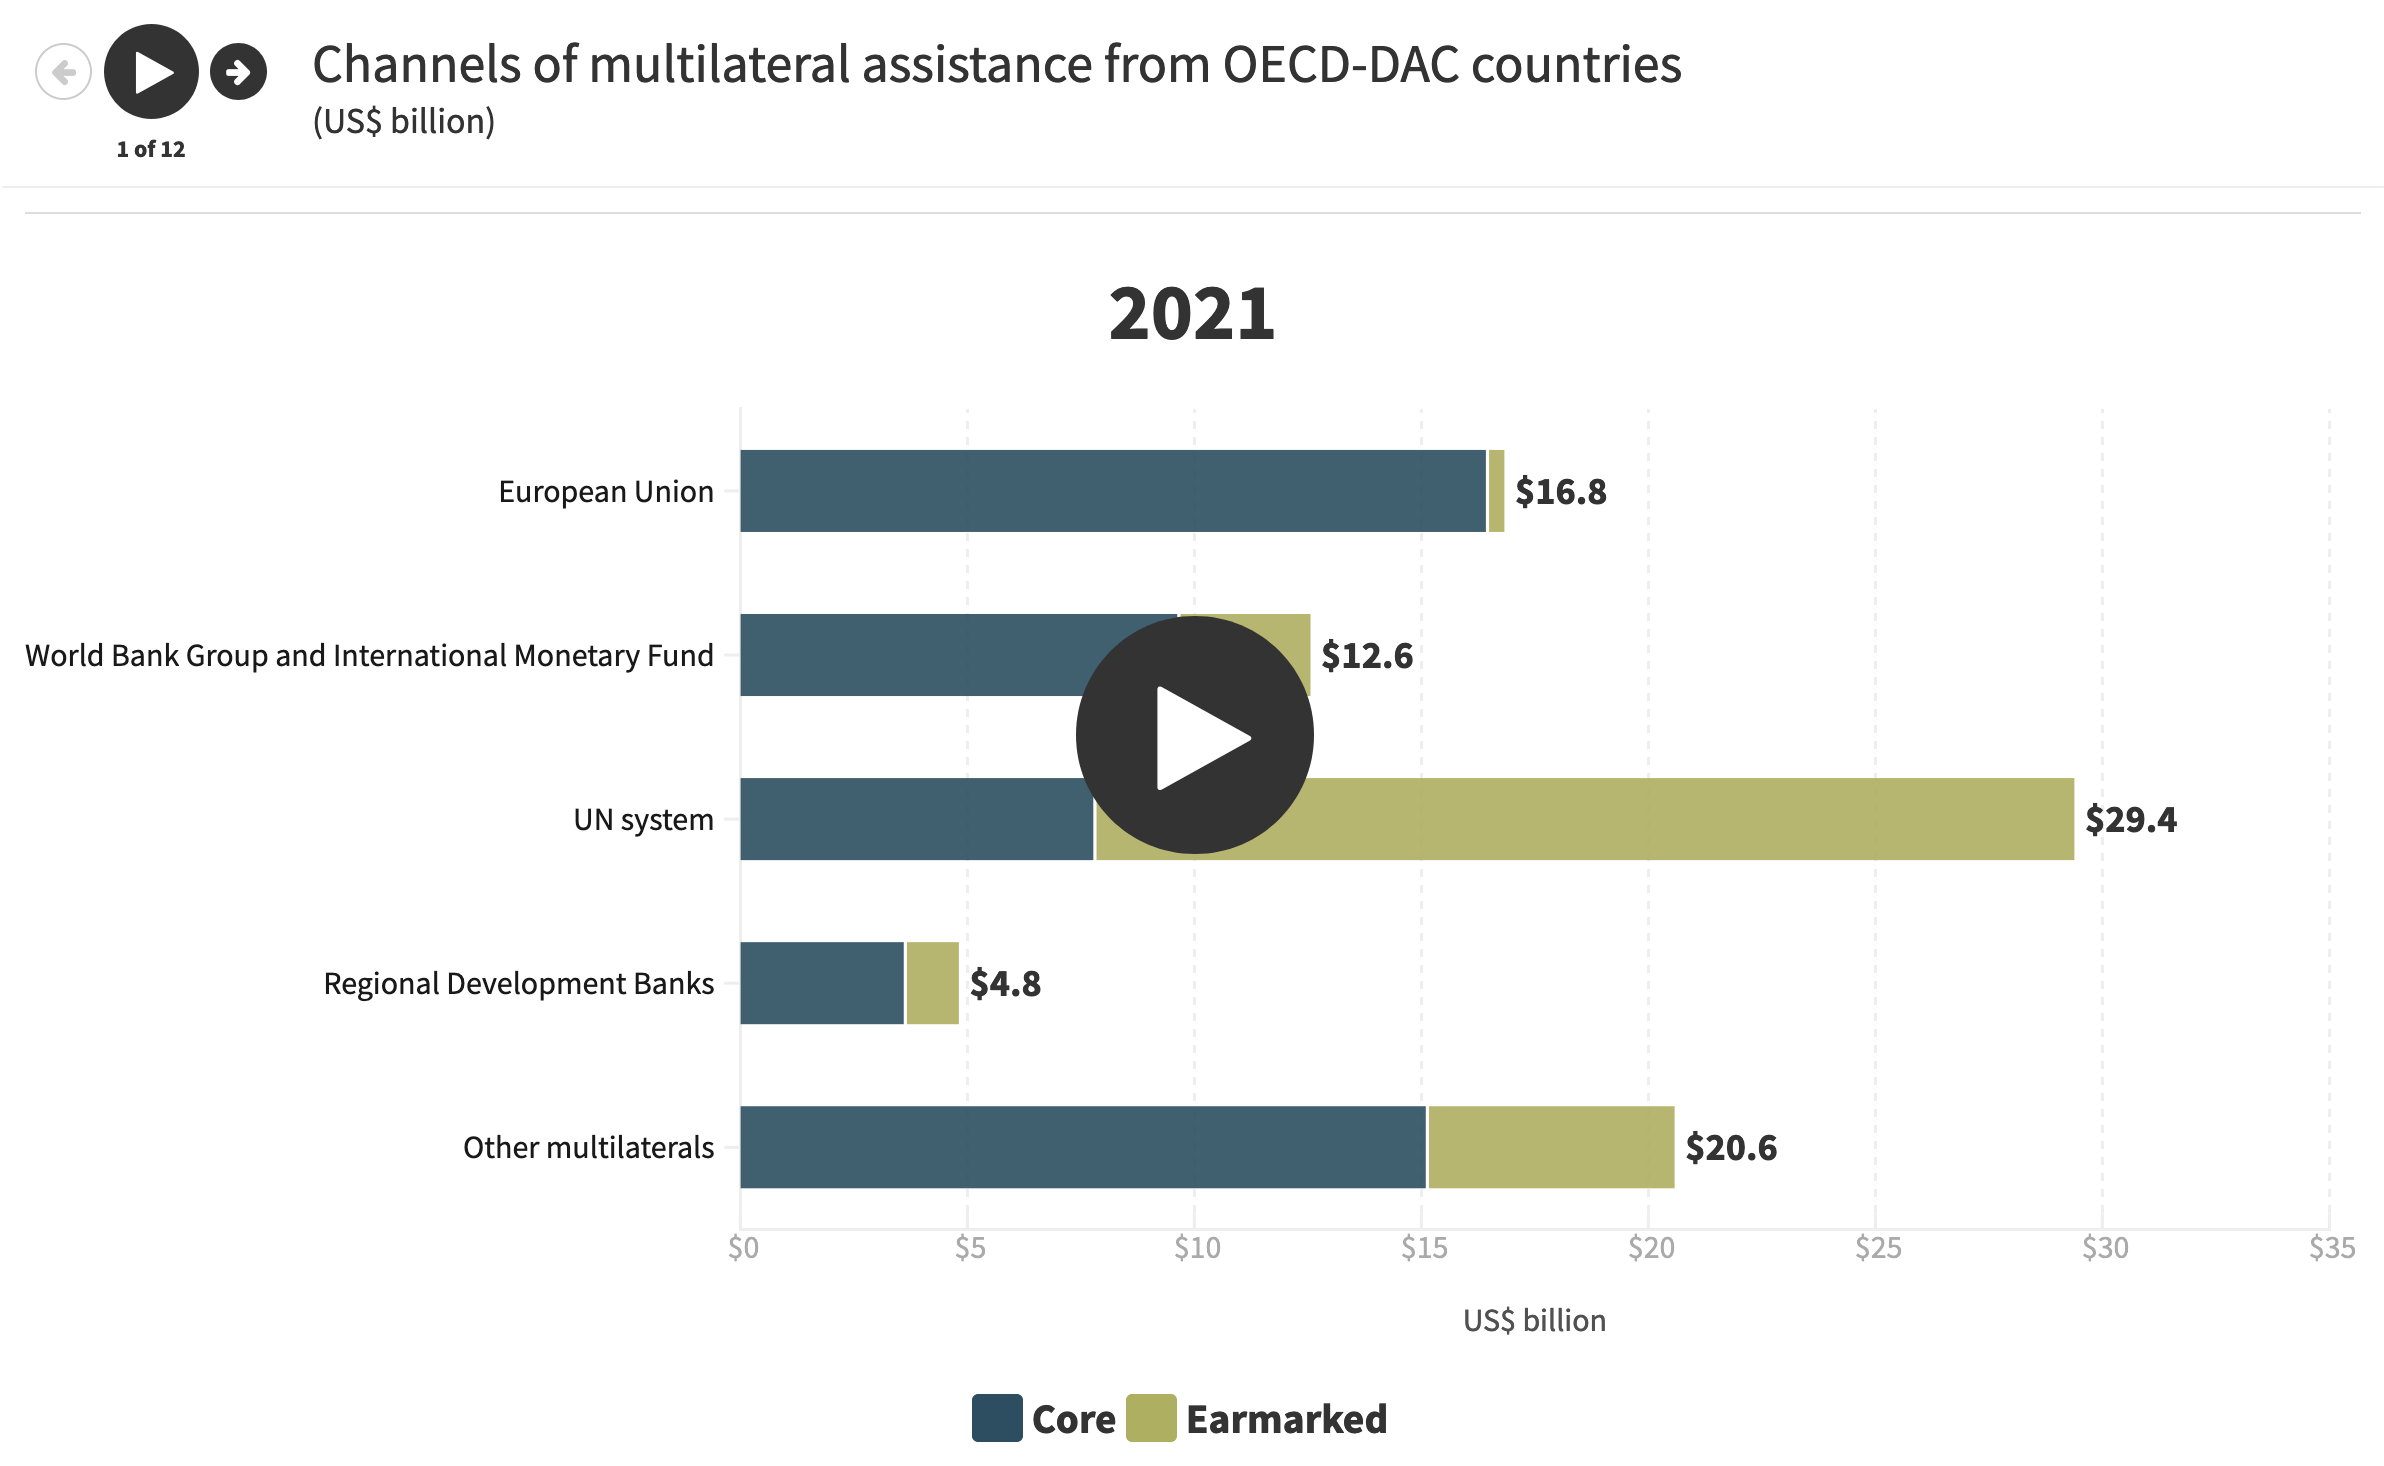 Channels of multilateral assistance from OECD-DAC countries, 2011 and 2021